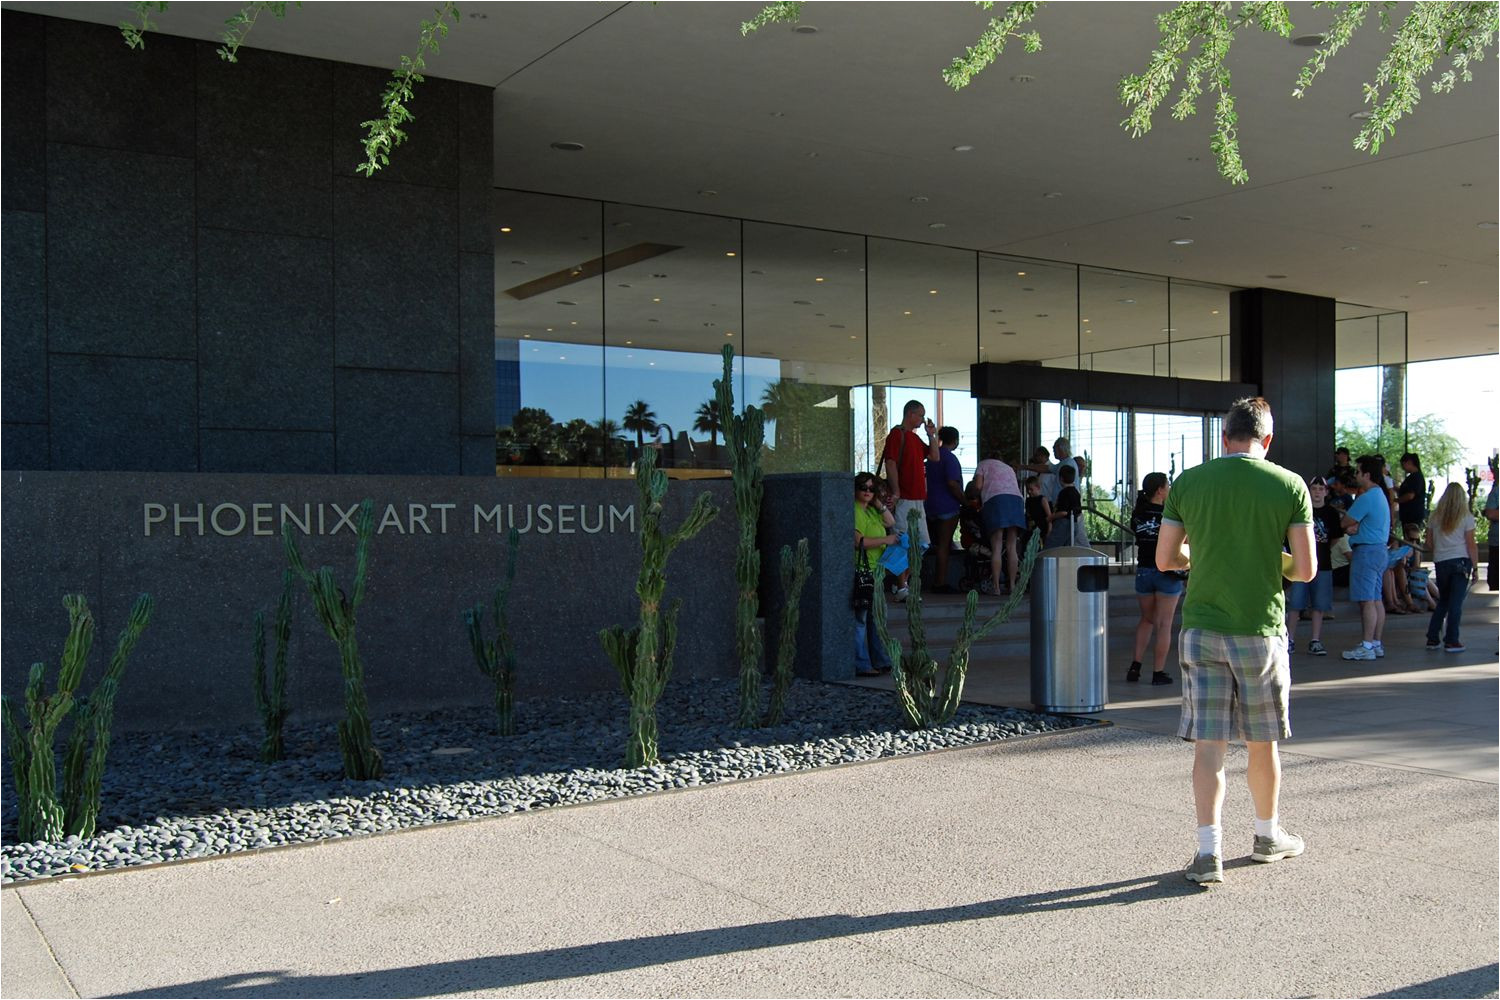 Light the Night Phoenix Art Museum Museums and More Open for First Friday In Phoenix